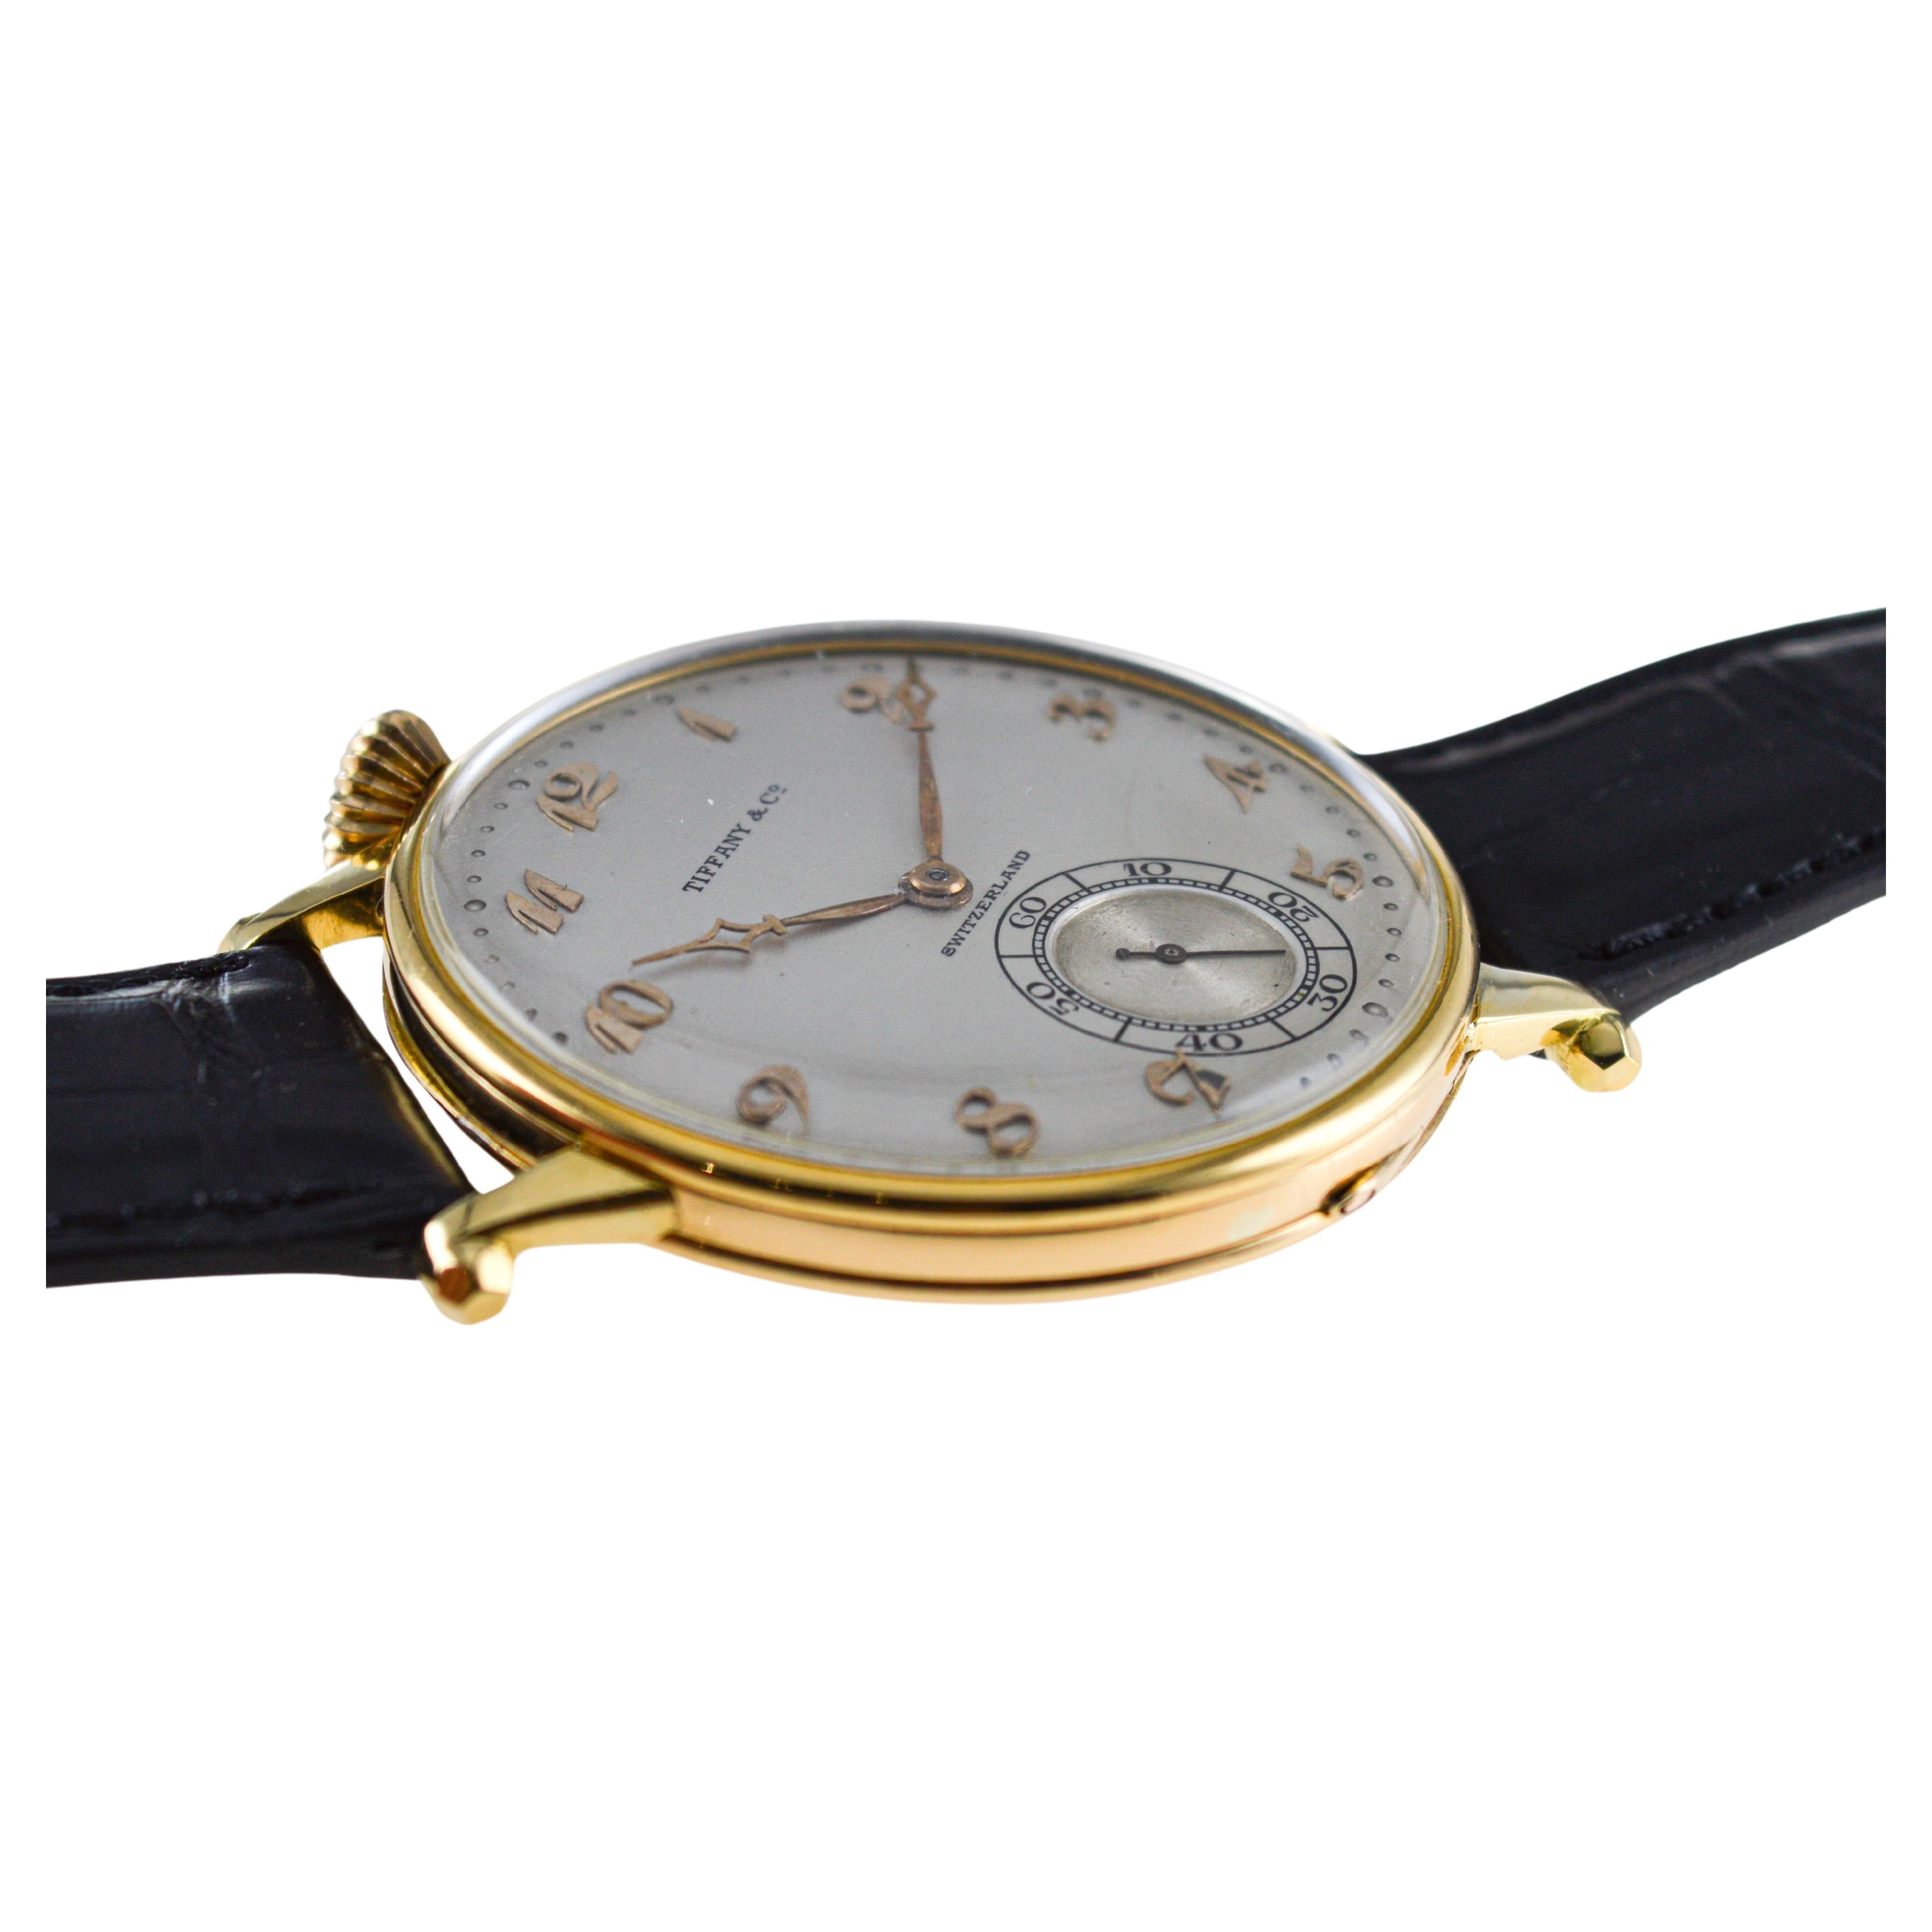 Agassiz 18Kt. Gold Oversized Watch for Tiffany & Co. Stern Freres Dial 1920's For Sale 4